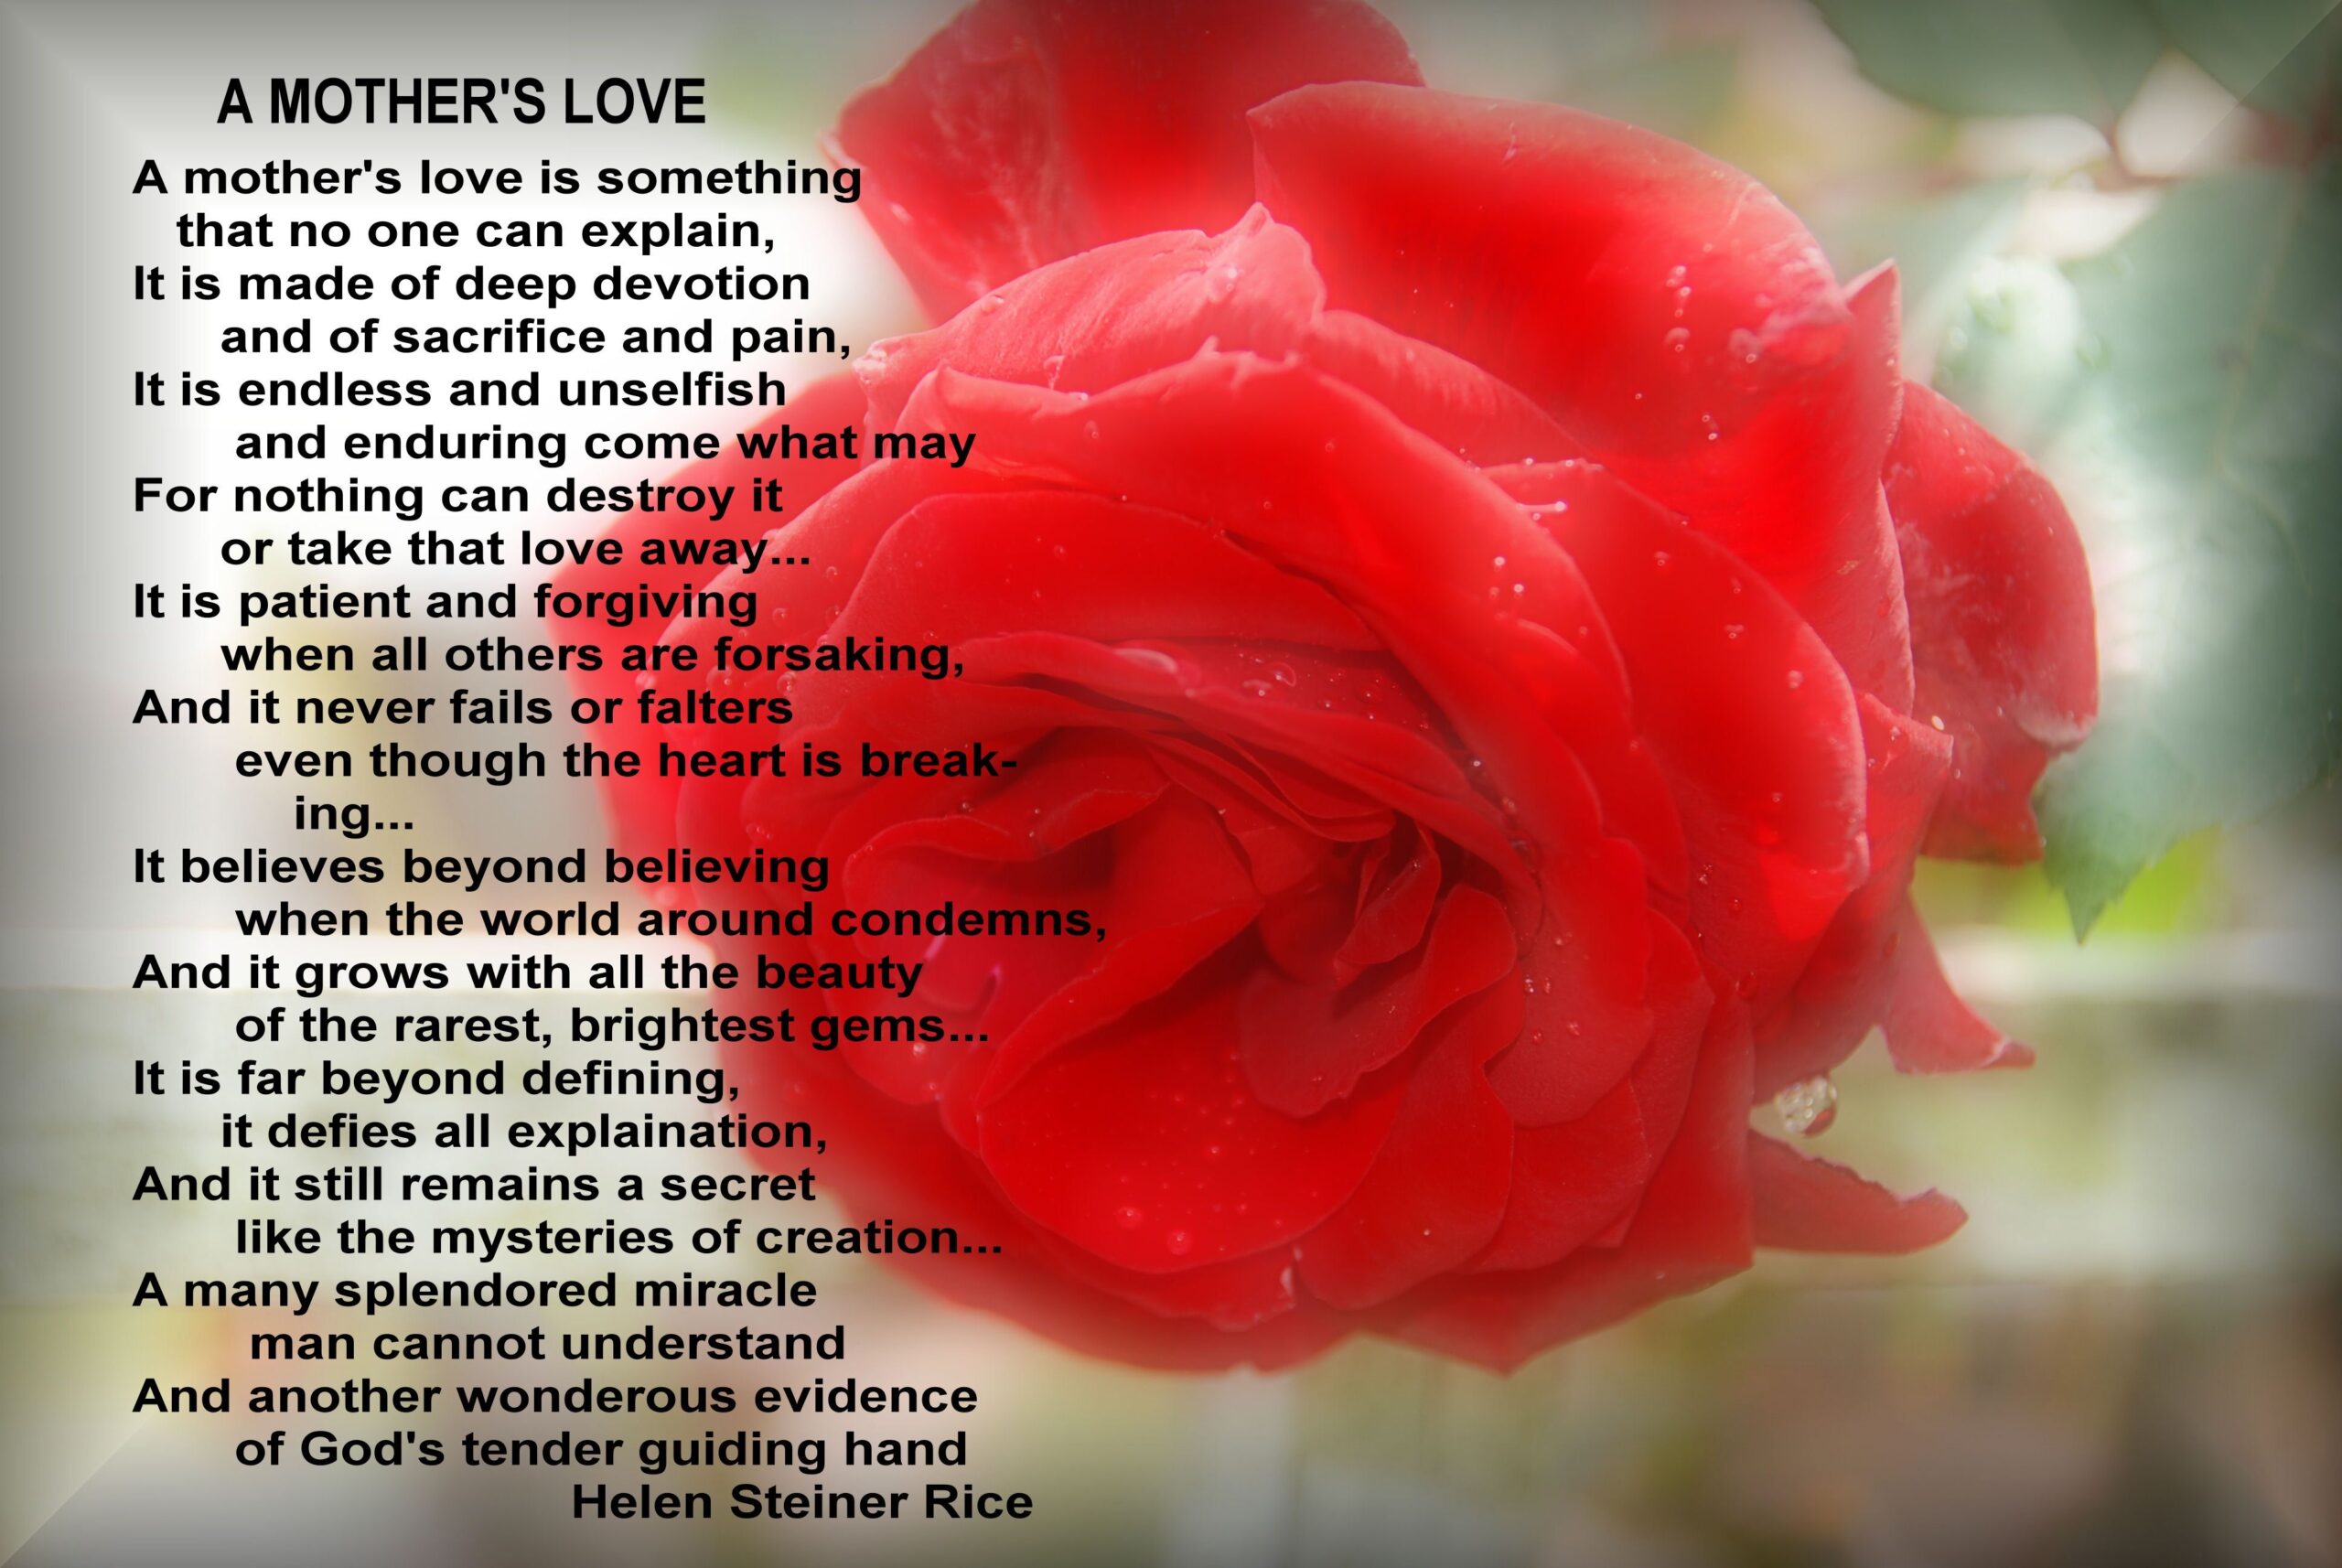 HAPPY MOTHER S DAY Poem A MOTHER S LOVE By Helen Steiner Rice Happy Mothers Day Poem Mothers Day Poems Poems About Mothers Love